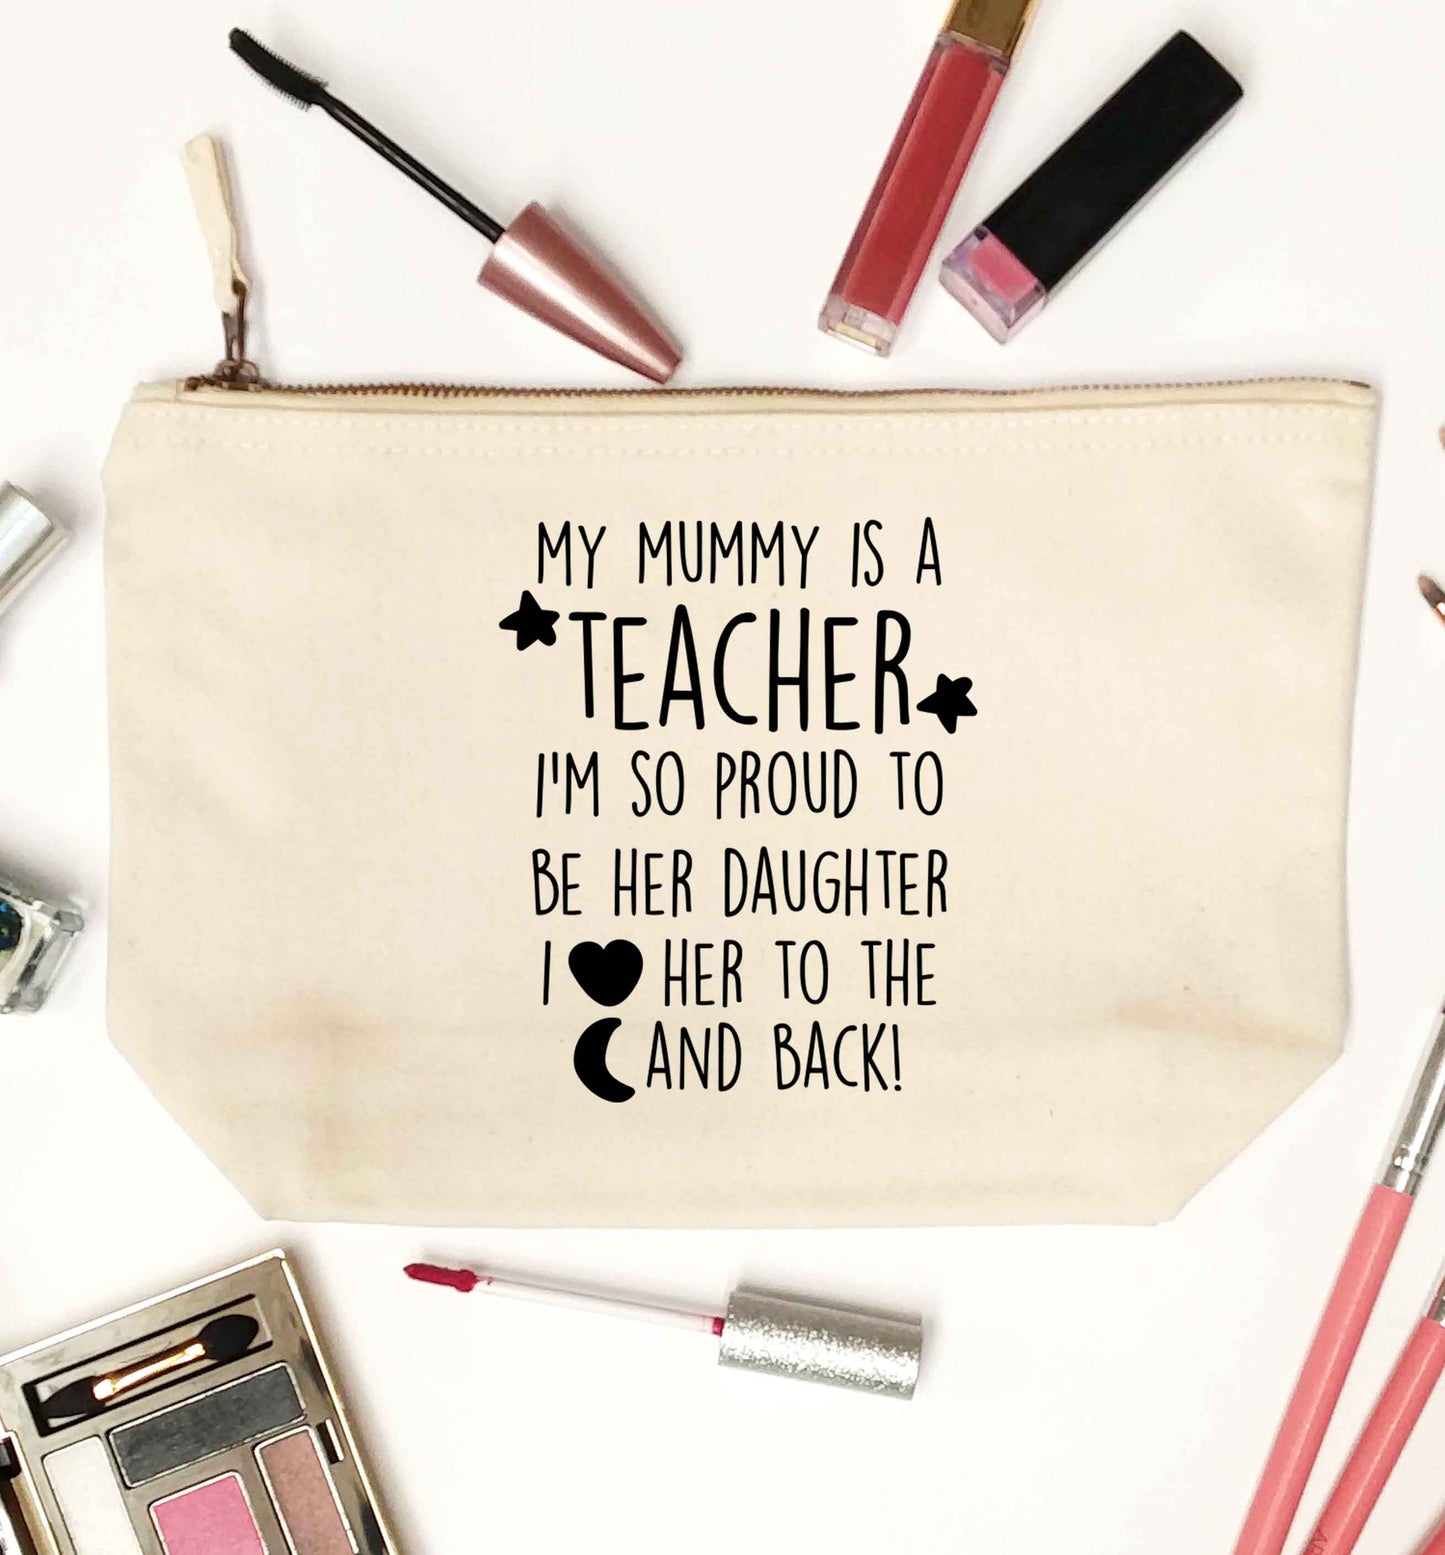 My mummy is a teacher I'm so proud to be her daughter I love her to the moon and back natural makeup bag